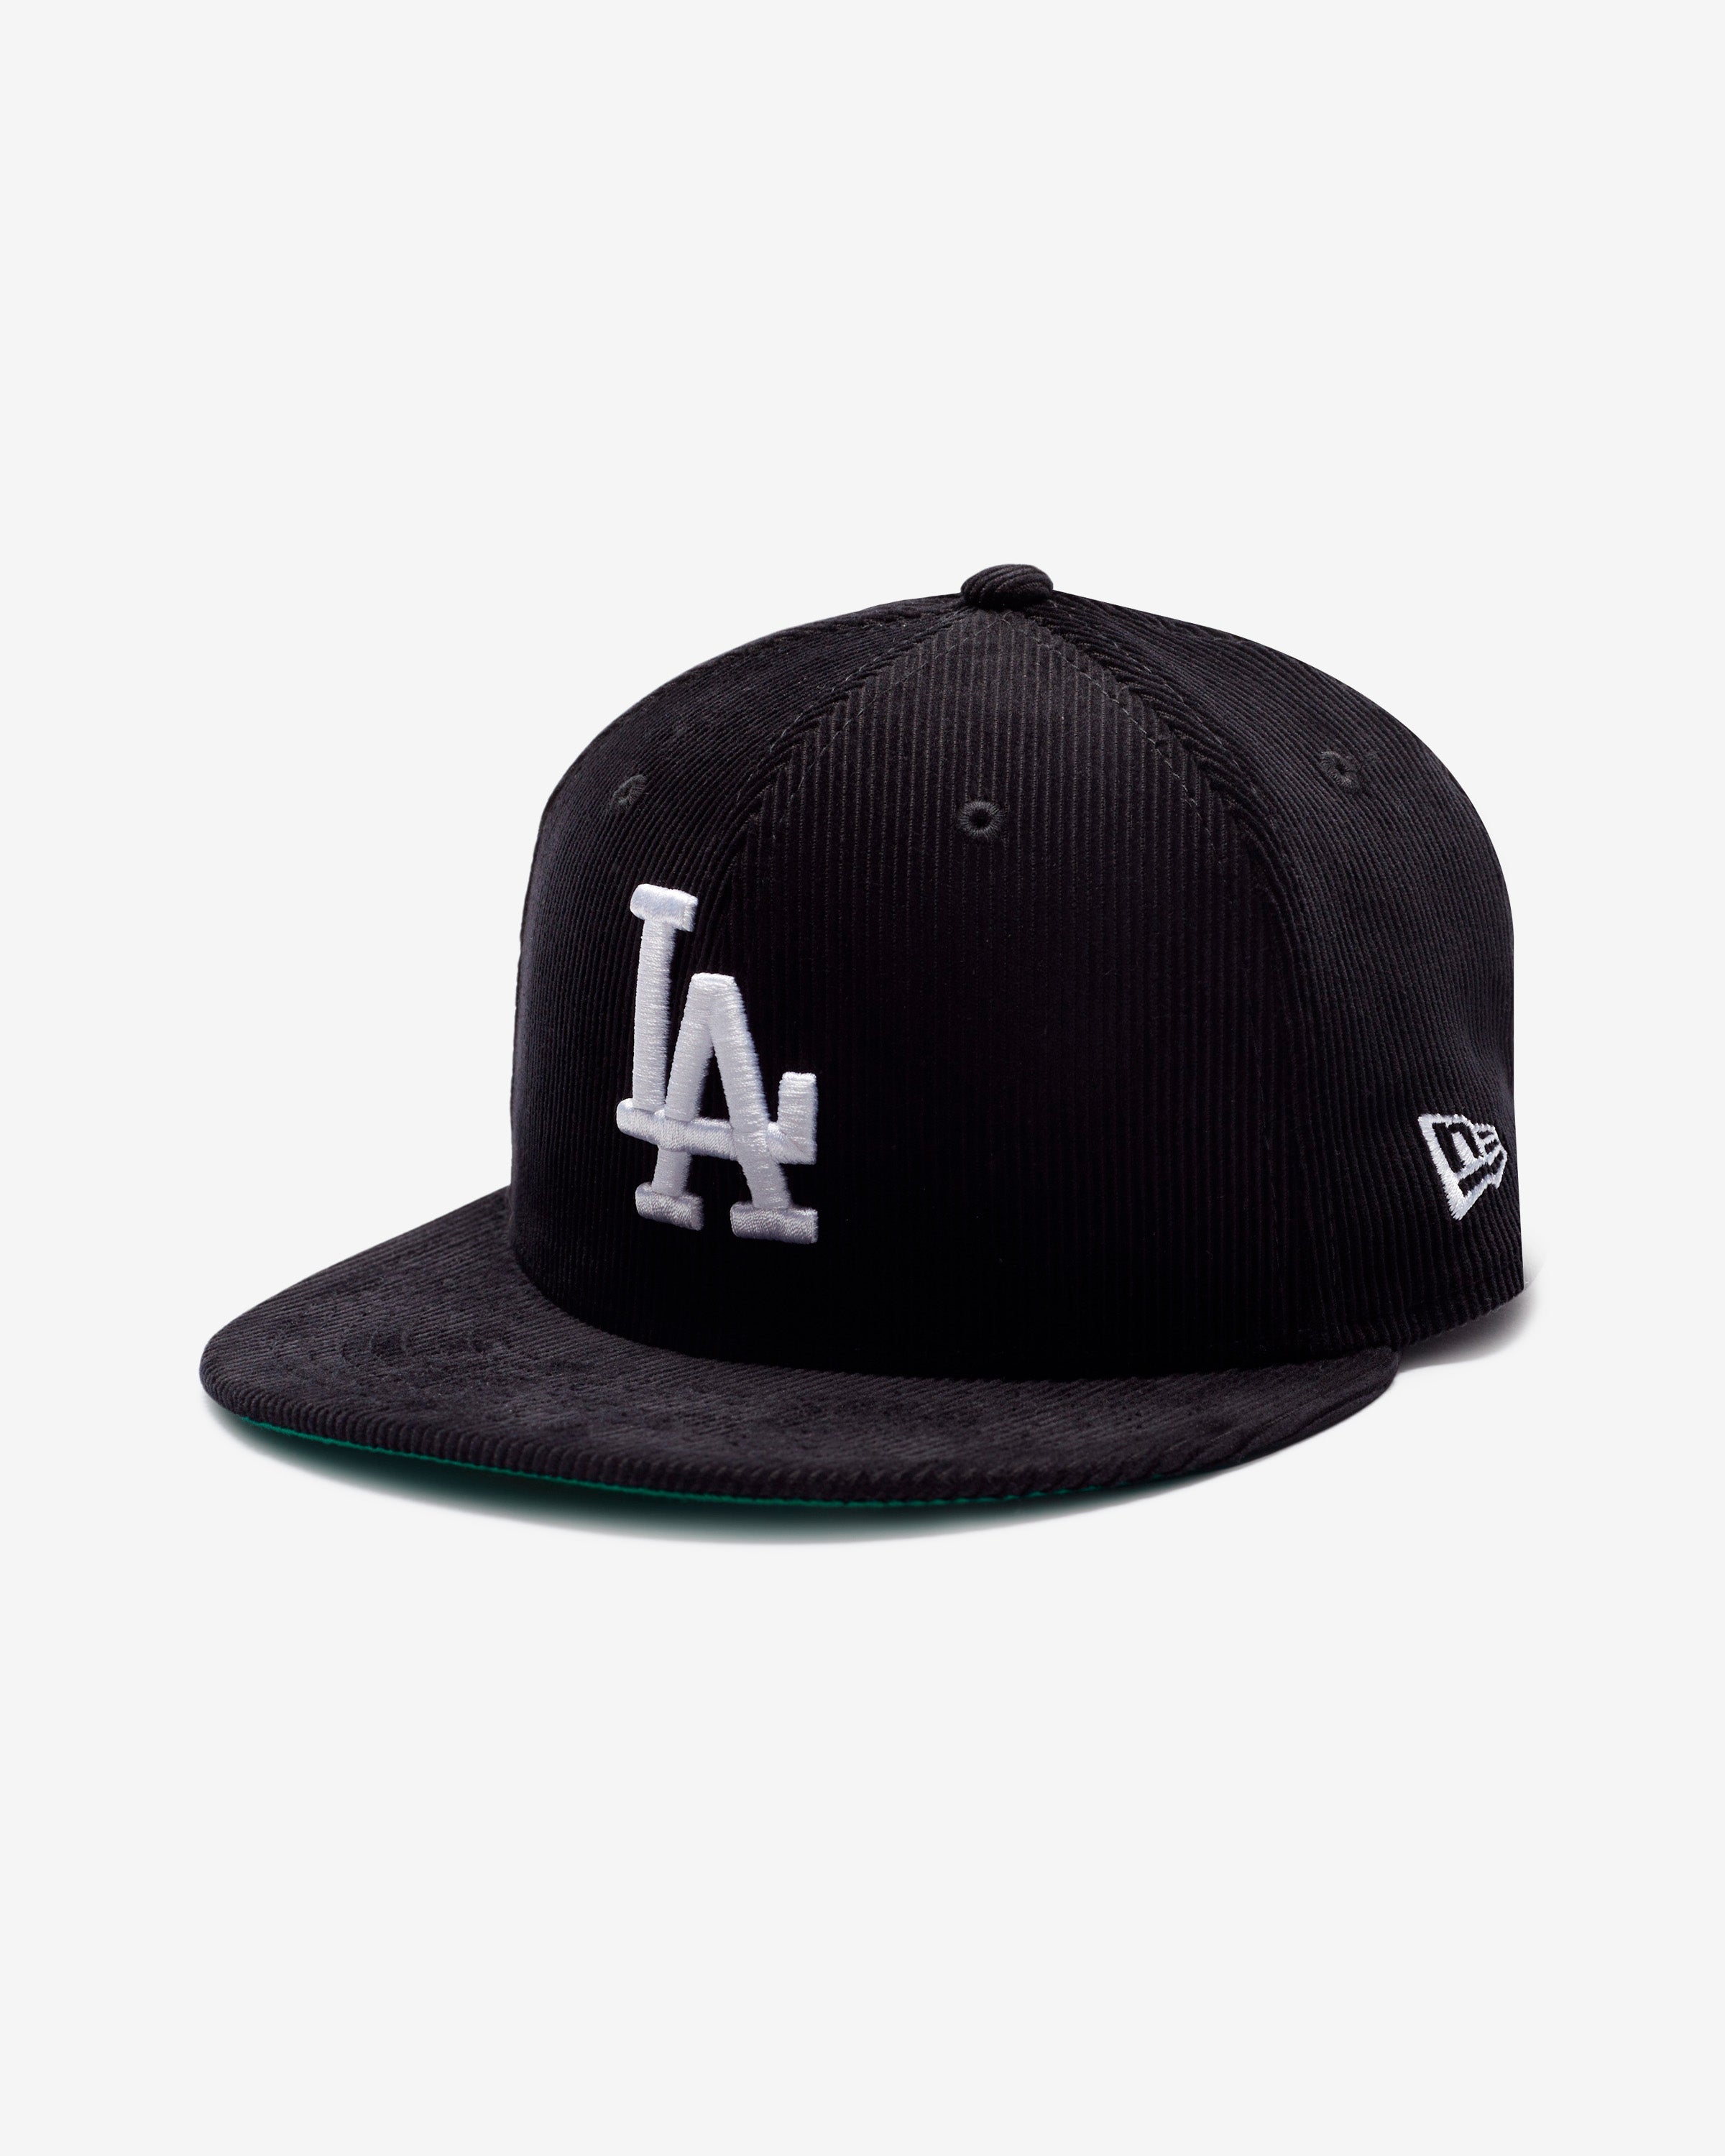 UNDEFEATED x Los Angeles Dodgers x New Era Corduroy 59FIFTY Fitted Cap